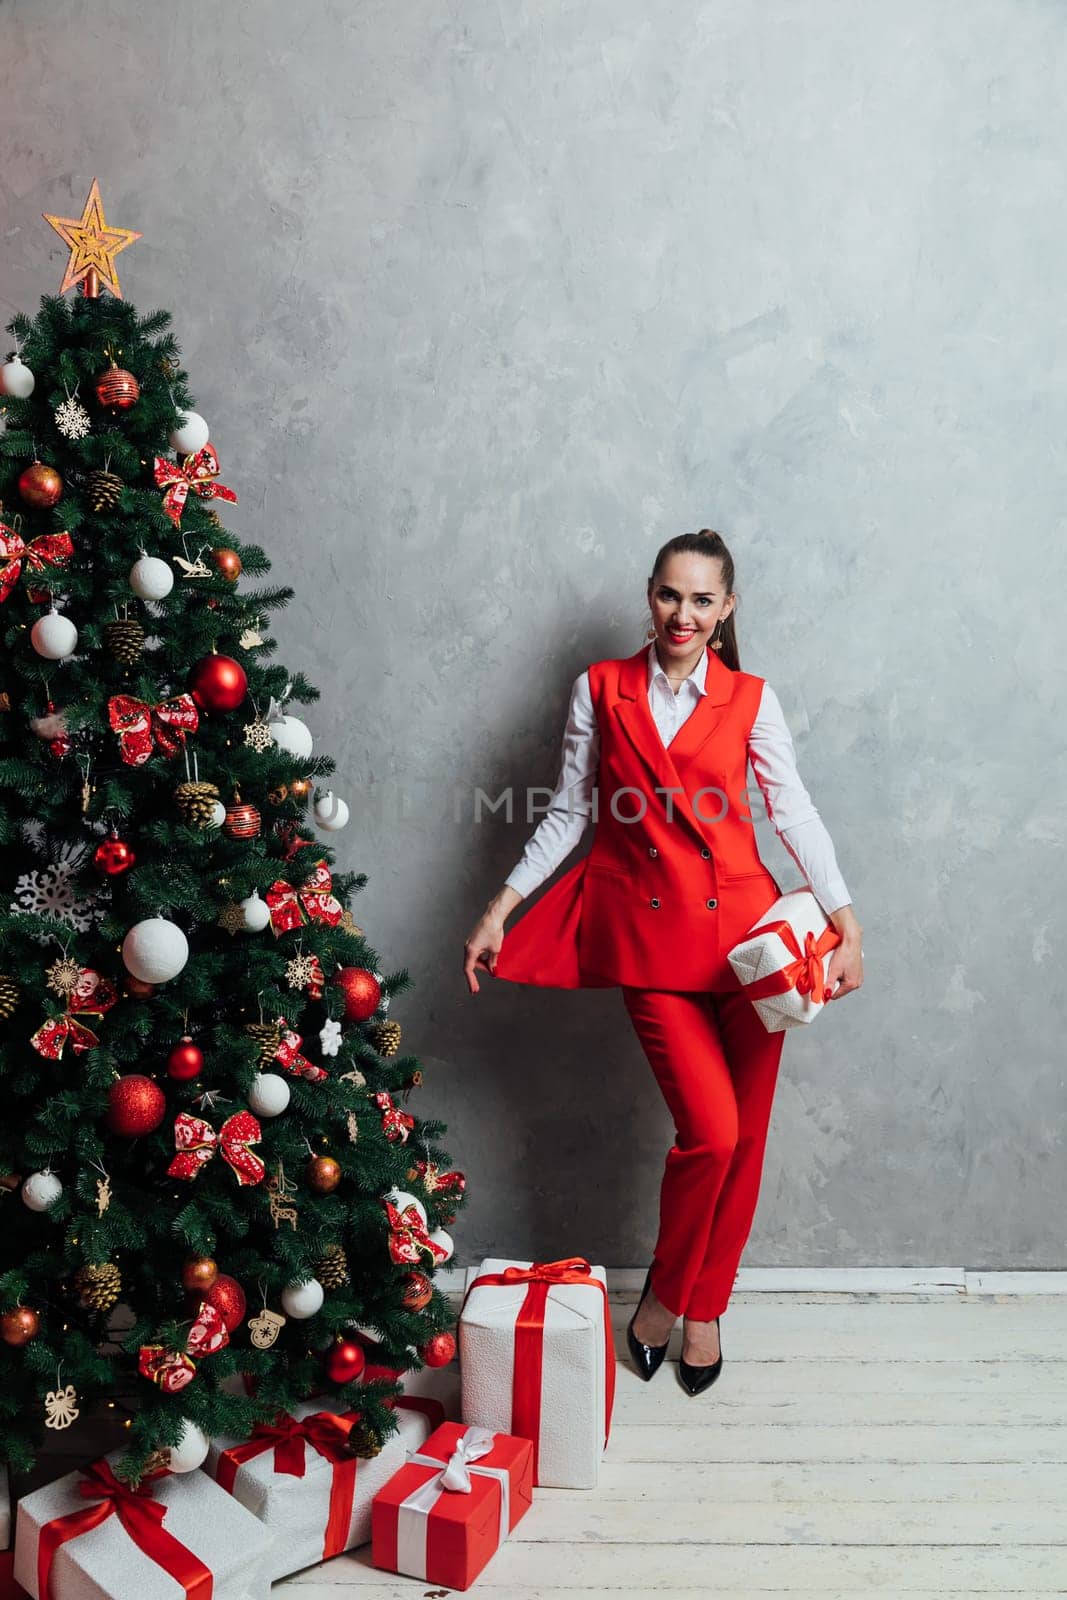 Woman decorating christmas tree with gifts